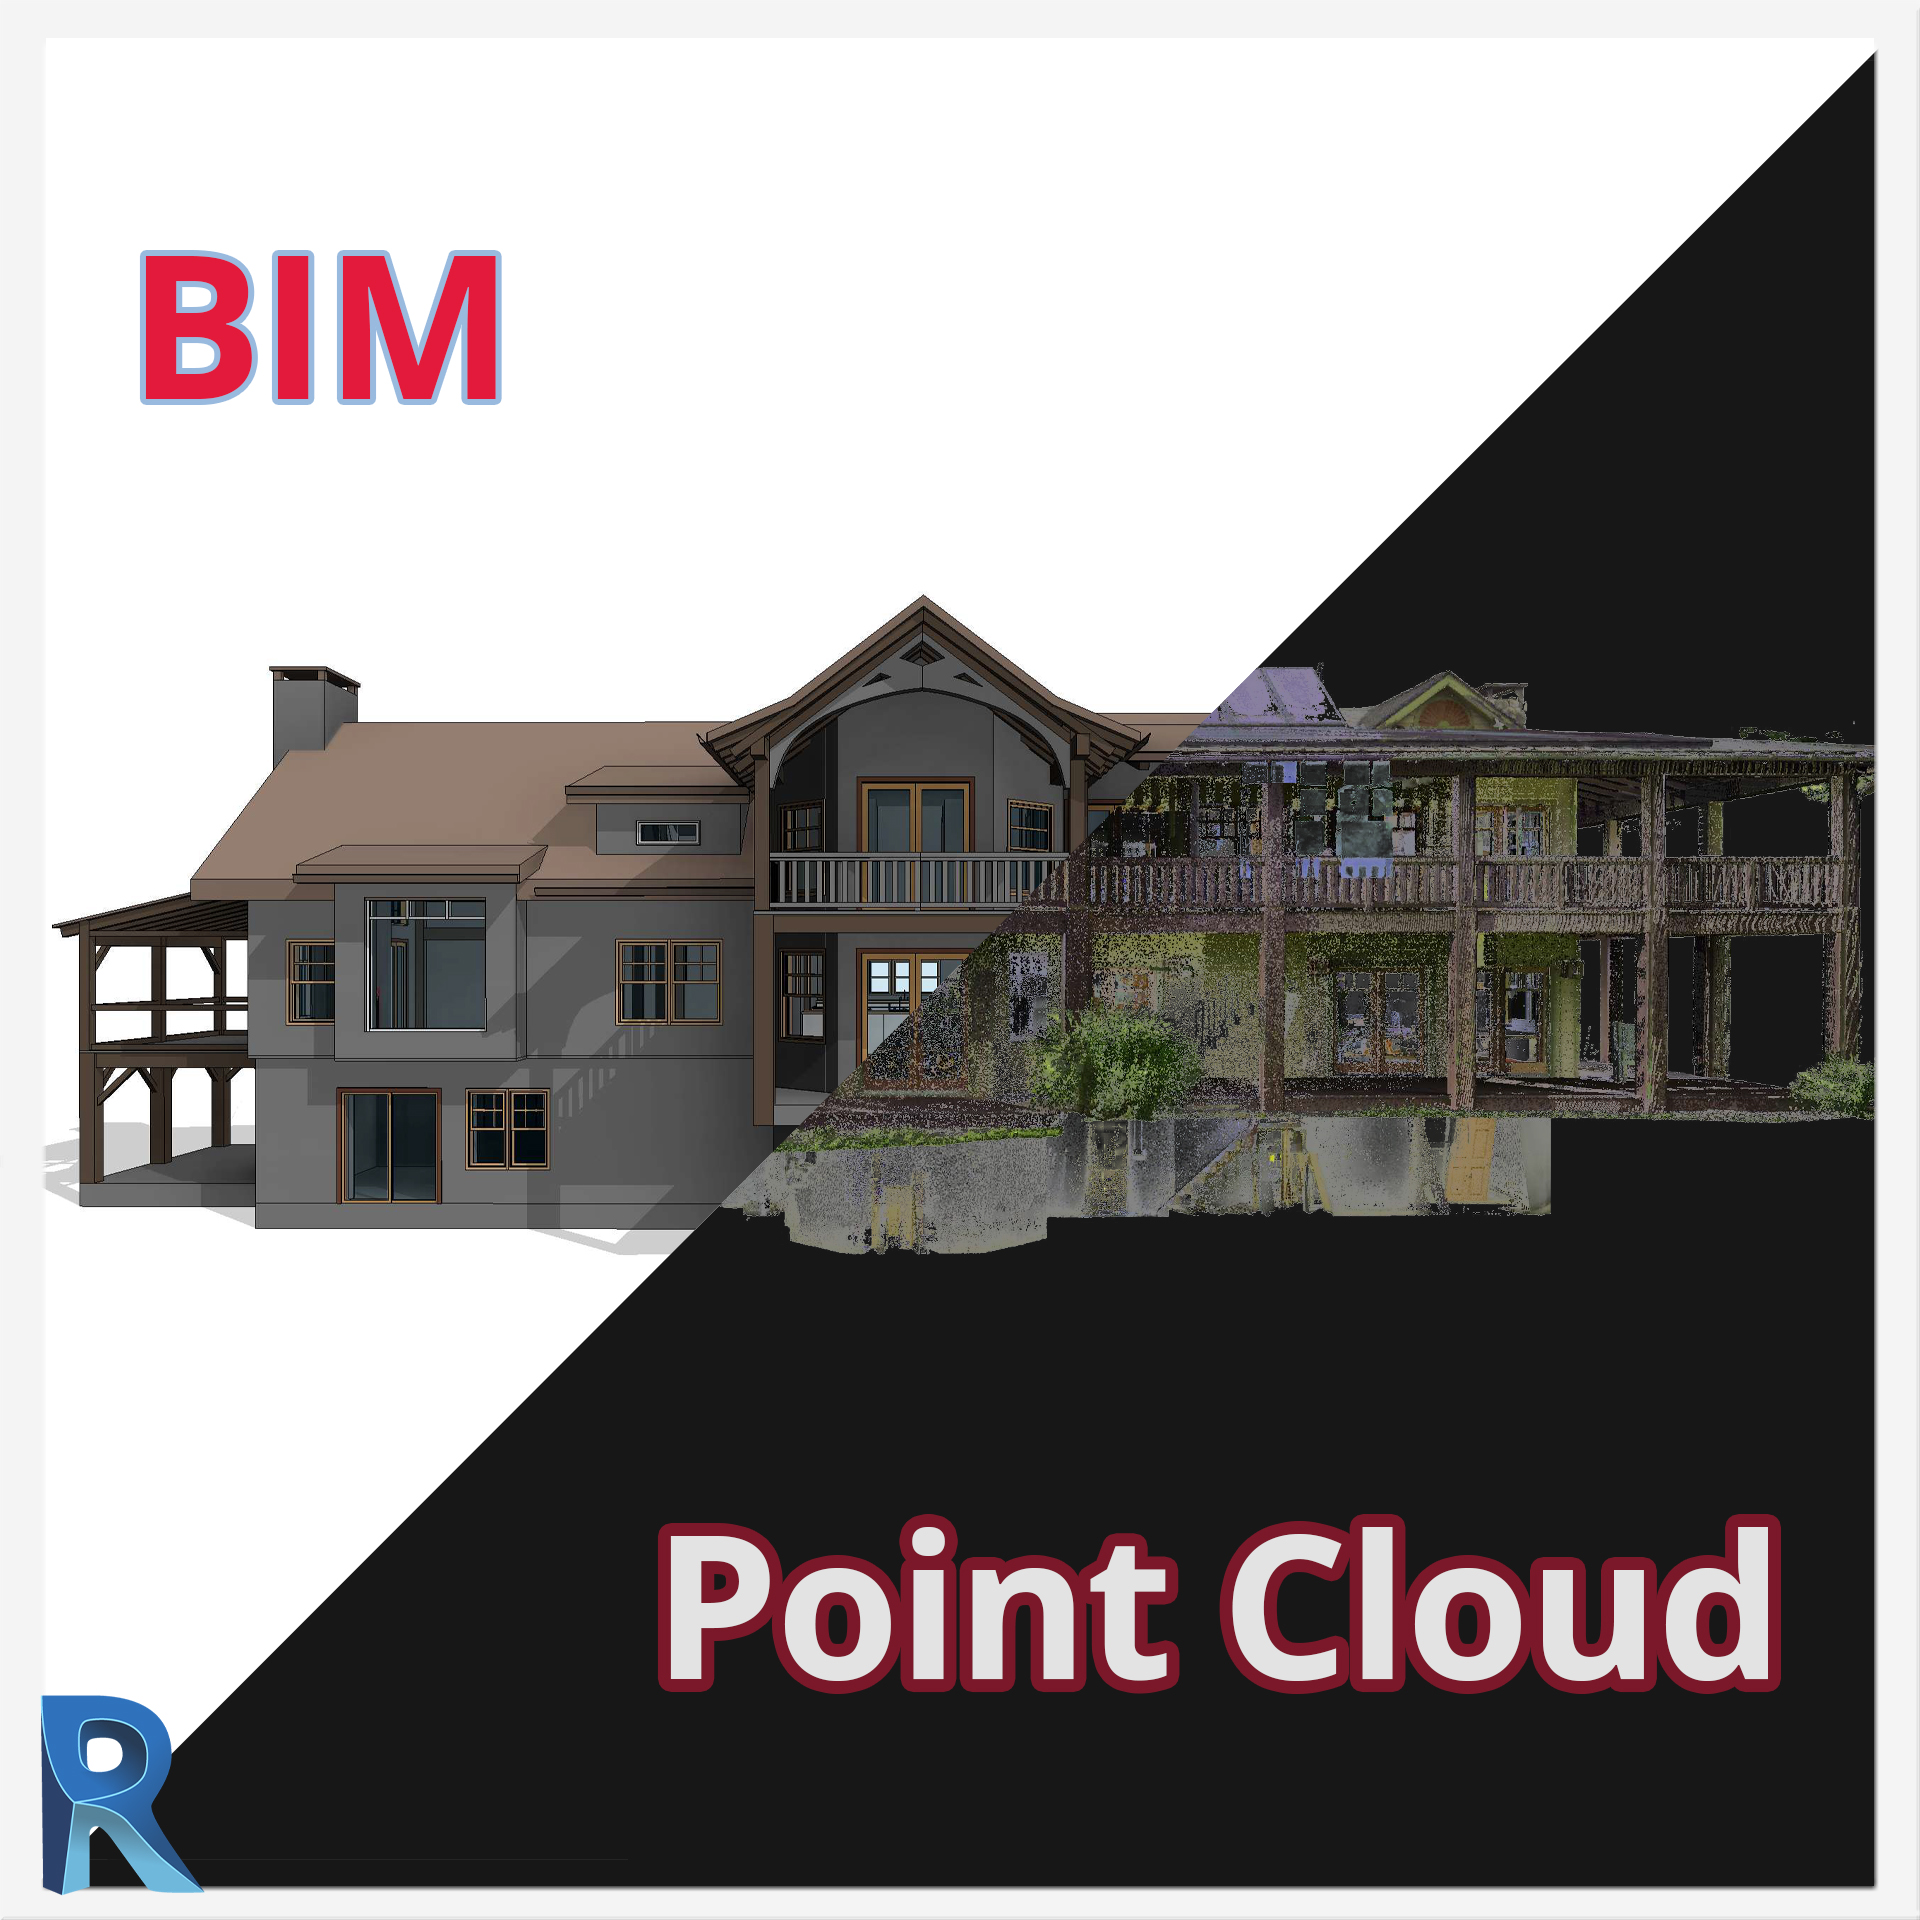 Rich results on Google when searching BIM